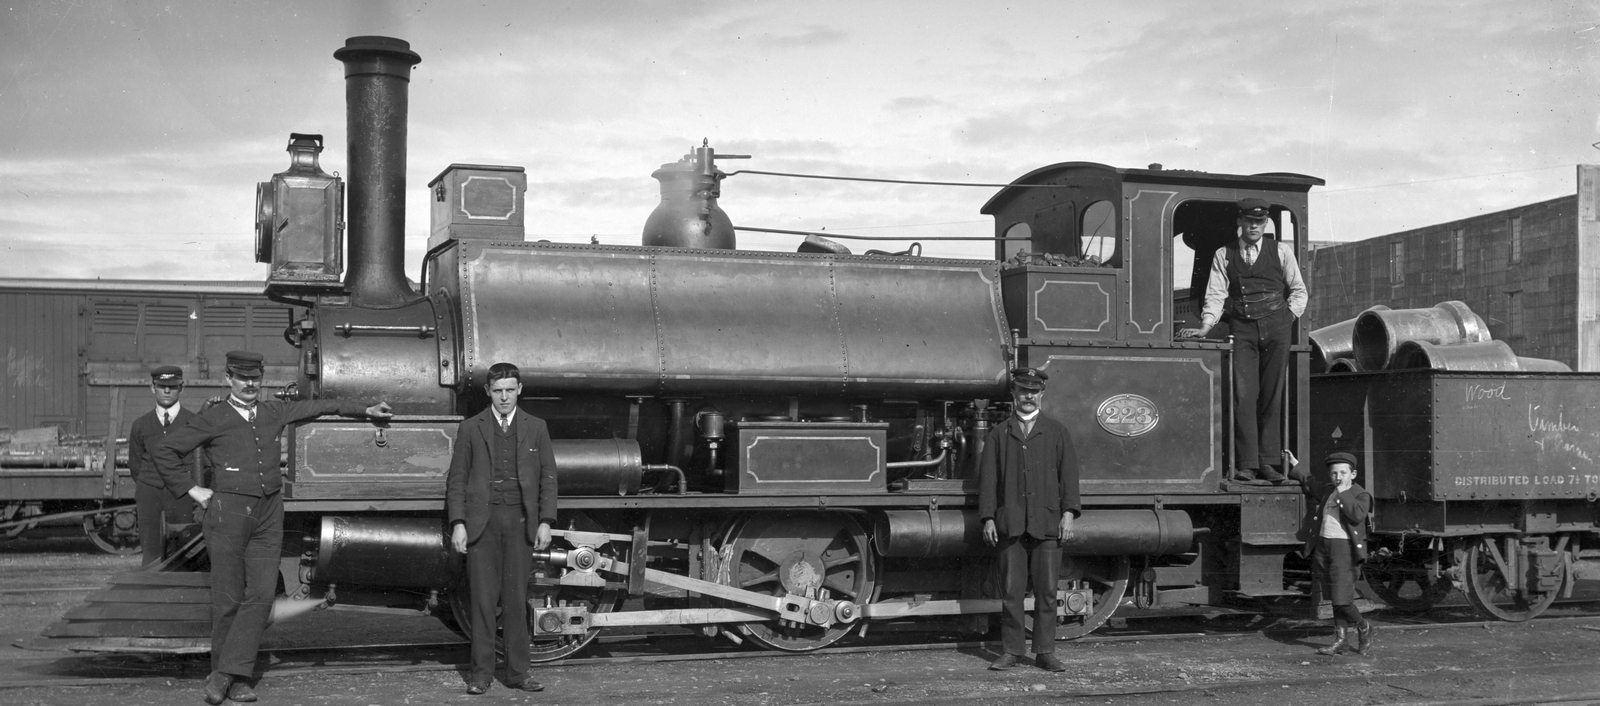 No. 223 with staff and the photographer's son around 1908